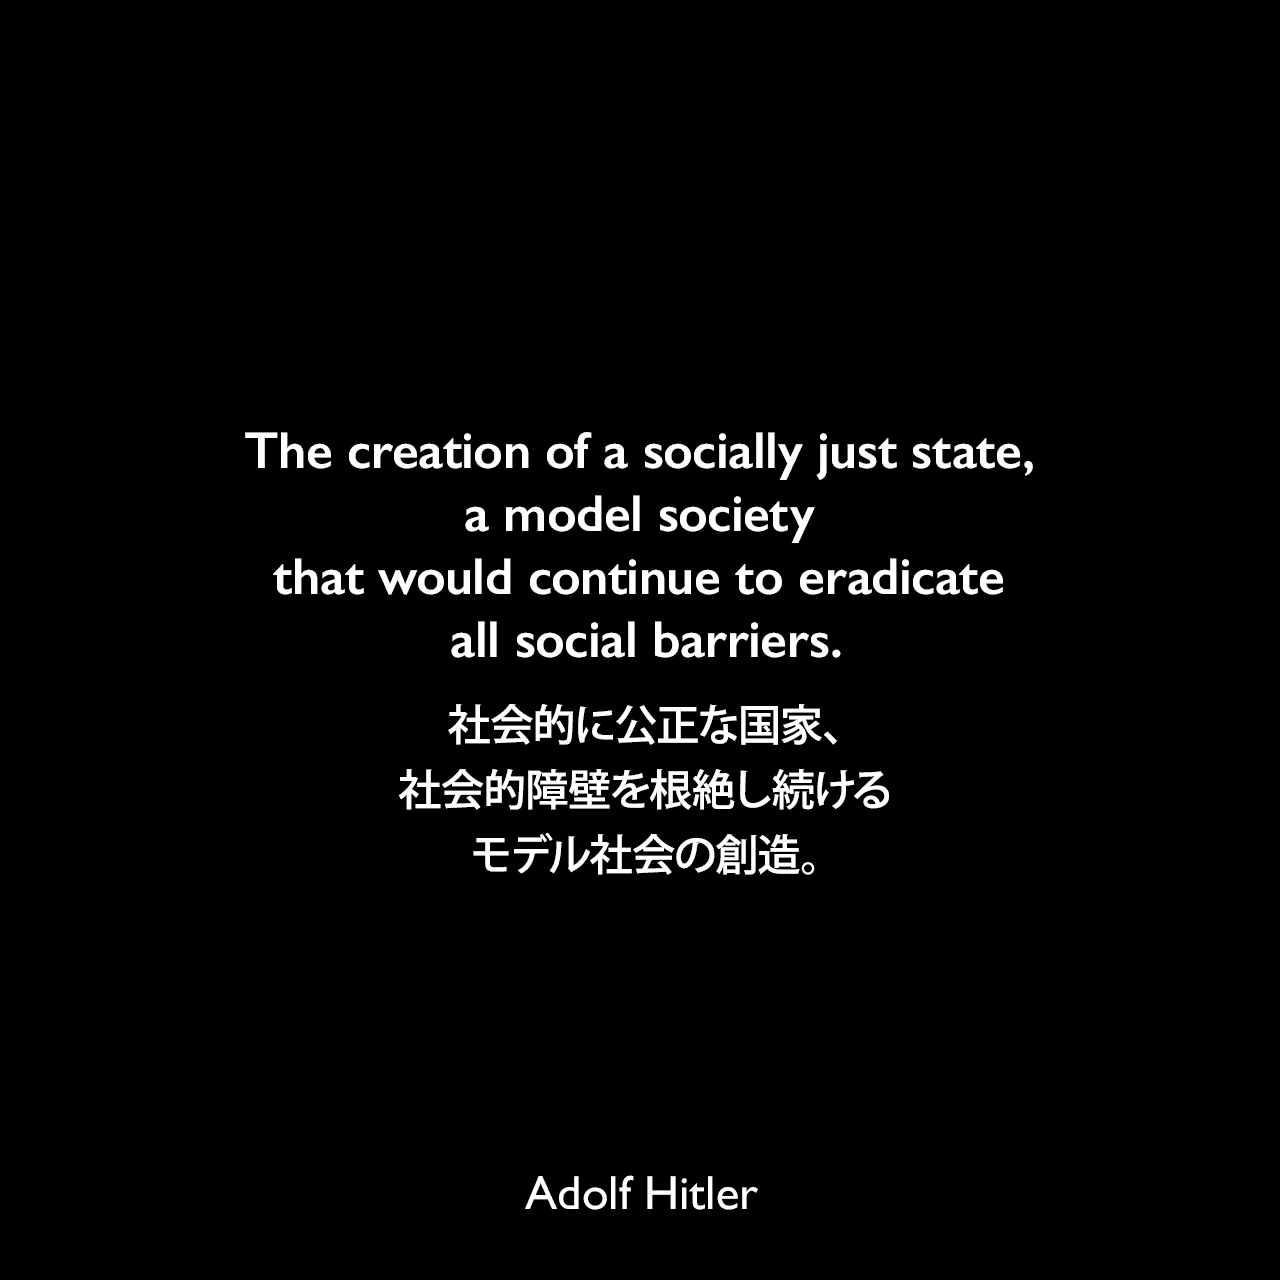 The creation of a socially just state, a model society that would continue to eradicate all social barriers.社会的に公正な国家、社会的障壁を根絶し続けるモデル社会の創造。- 1940年10月10日ベルリンのラインメタル・ボルシグ工場での労働者へのスピーチよりAdolf Hitler